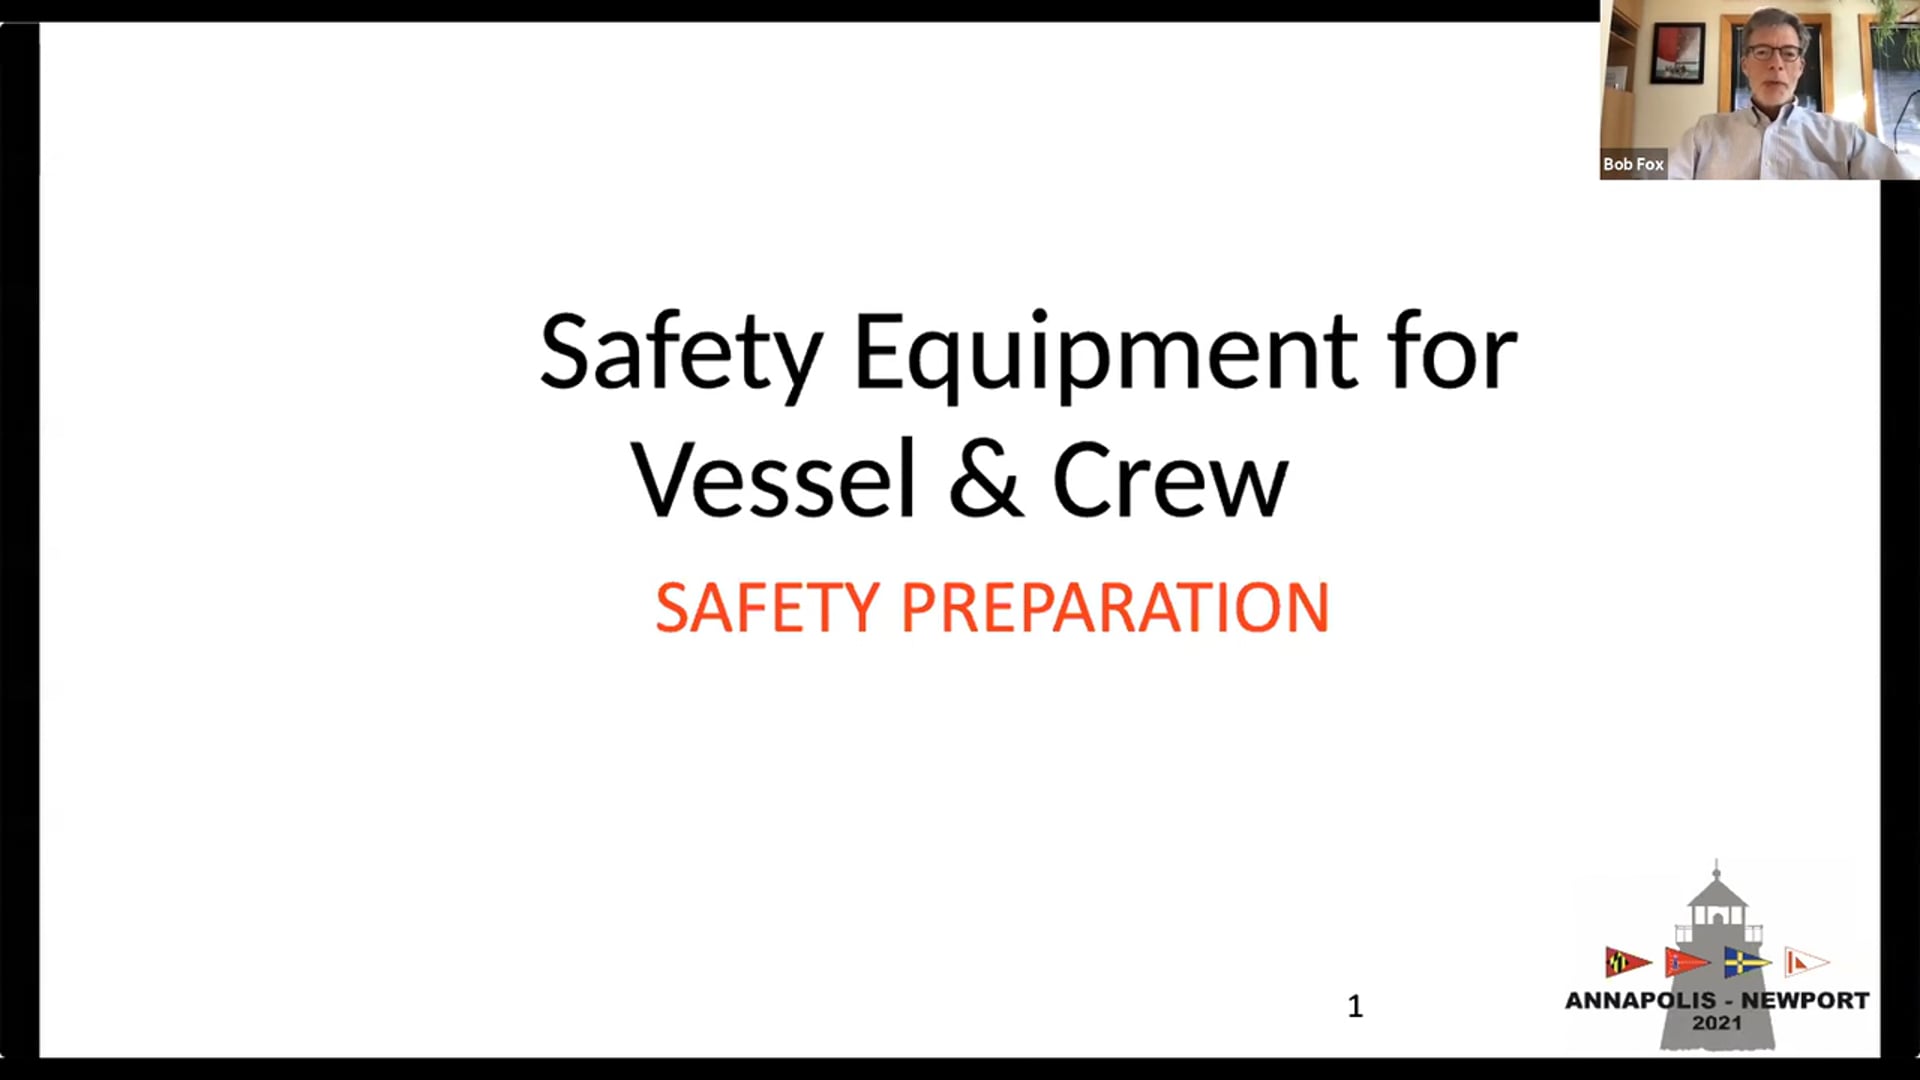 Safety Equipment for Vessel & Crew - 03/20/21